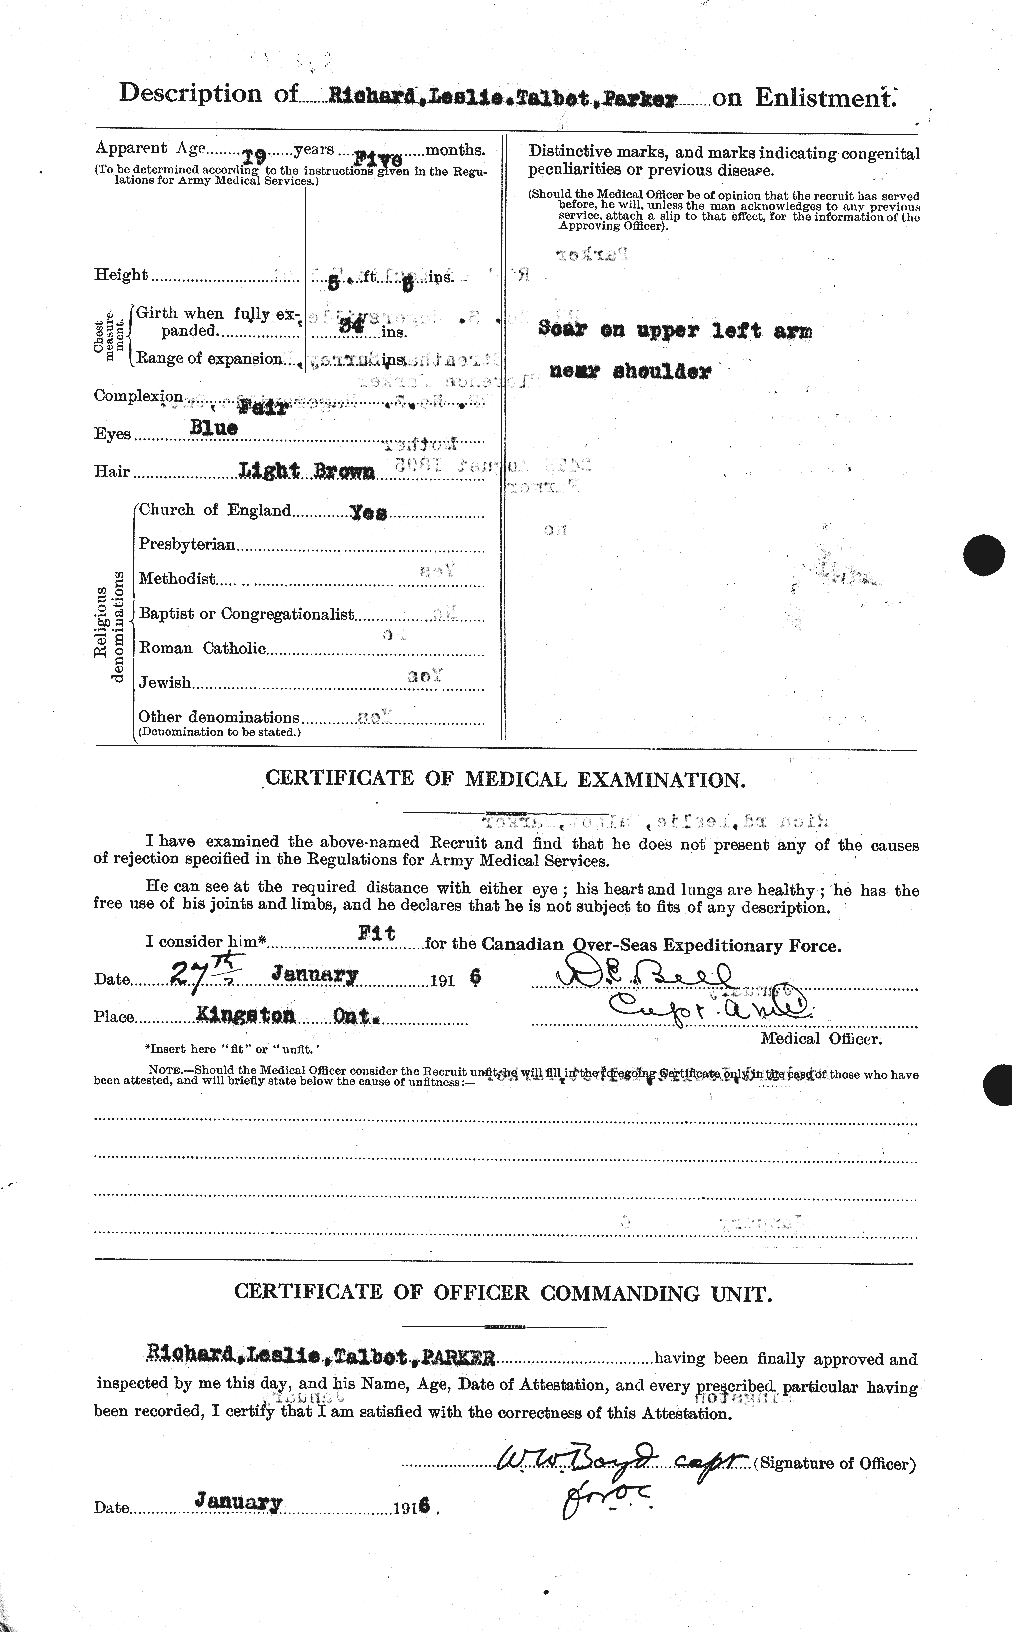 Personnel Records of the First World War - CEF 565588b